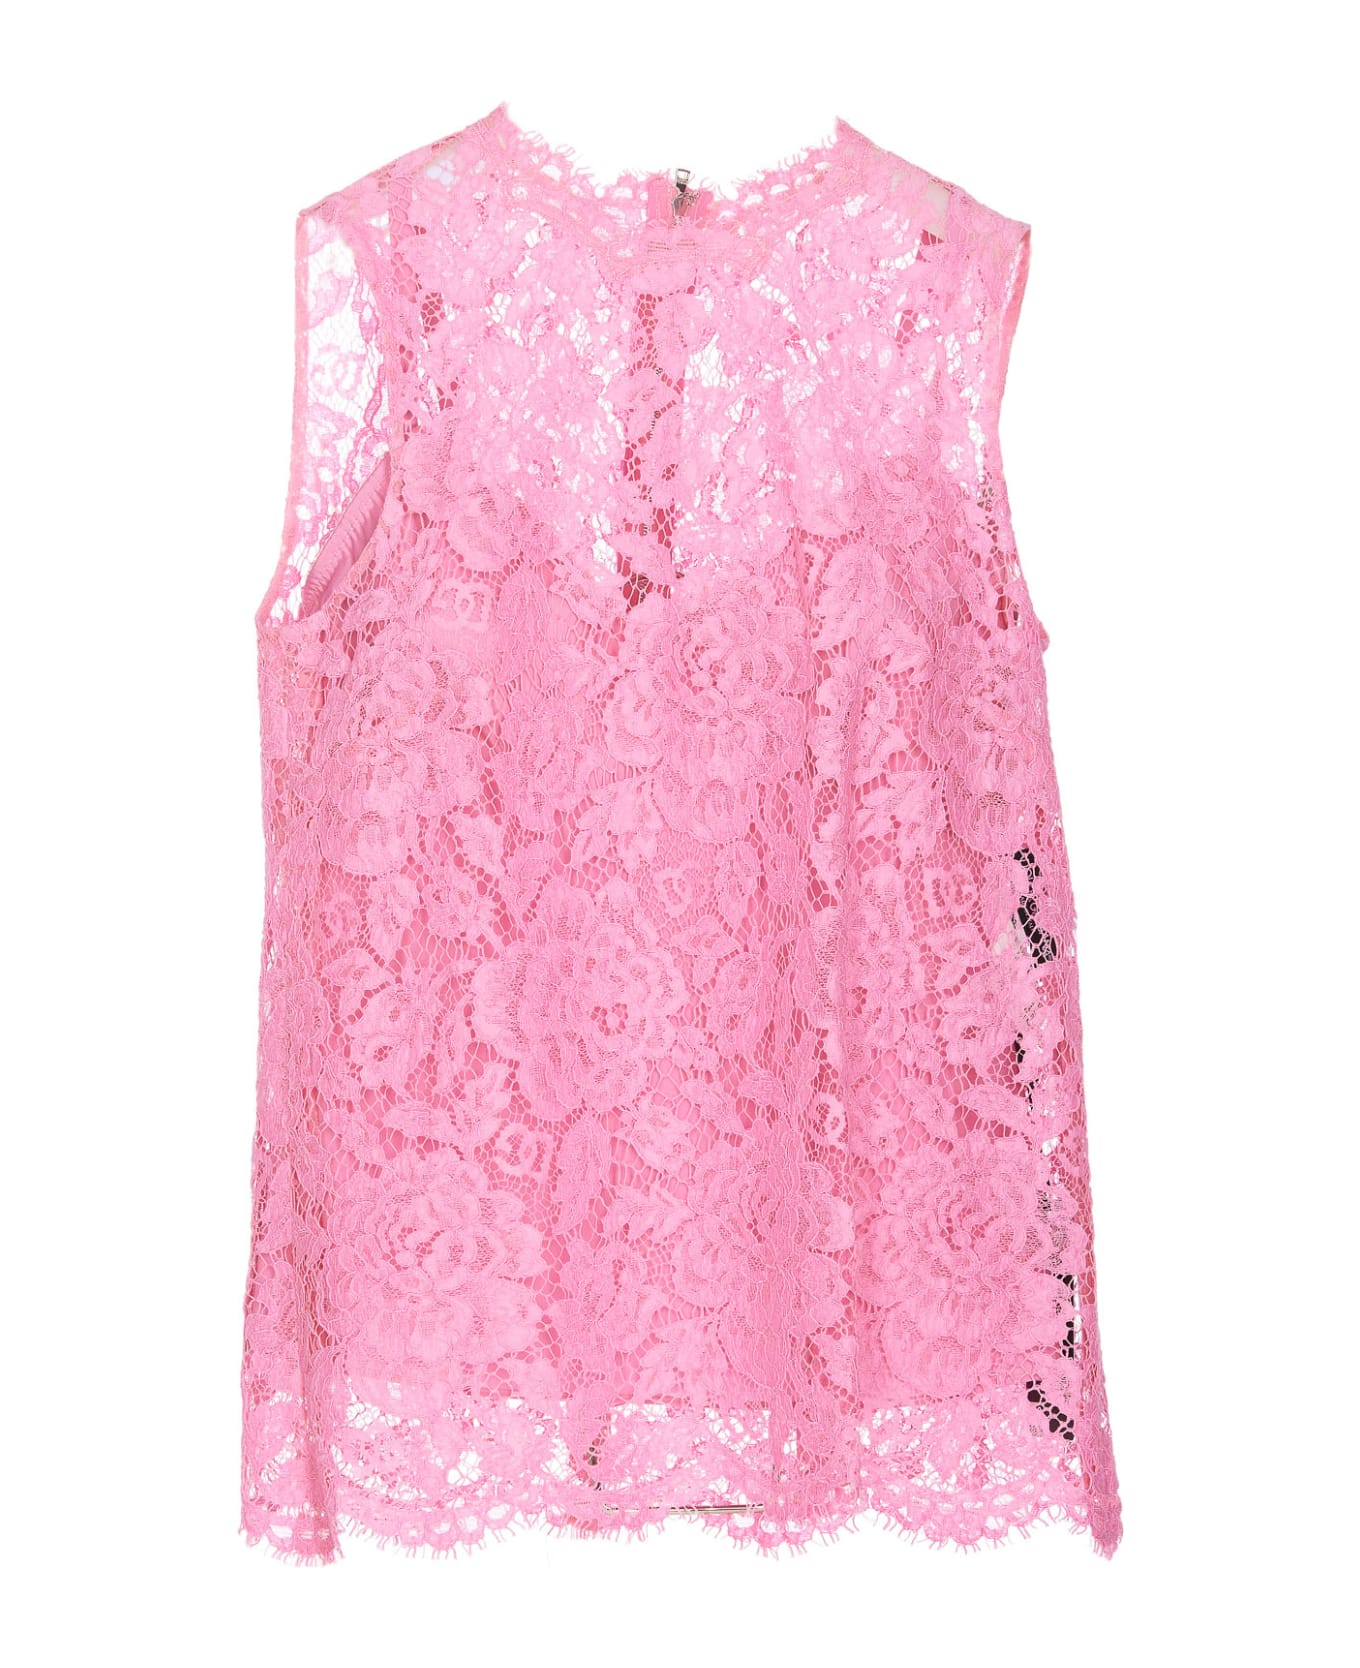 Dolce & Gabbana Cordonetto Lace Top - Pink トップス